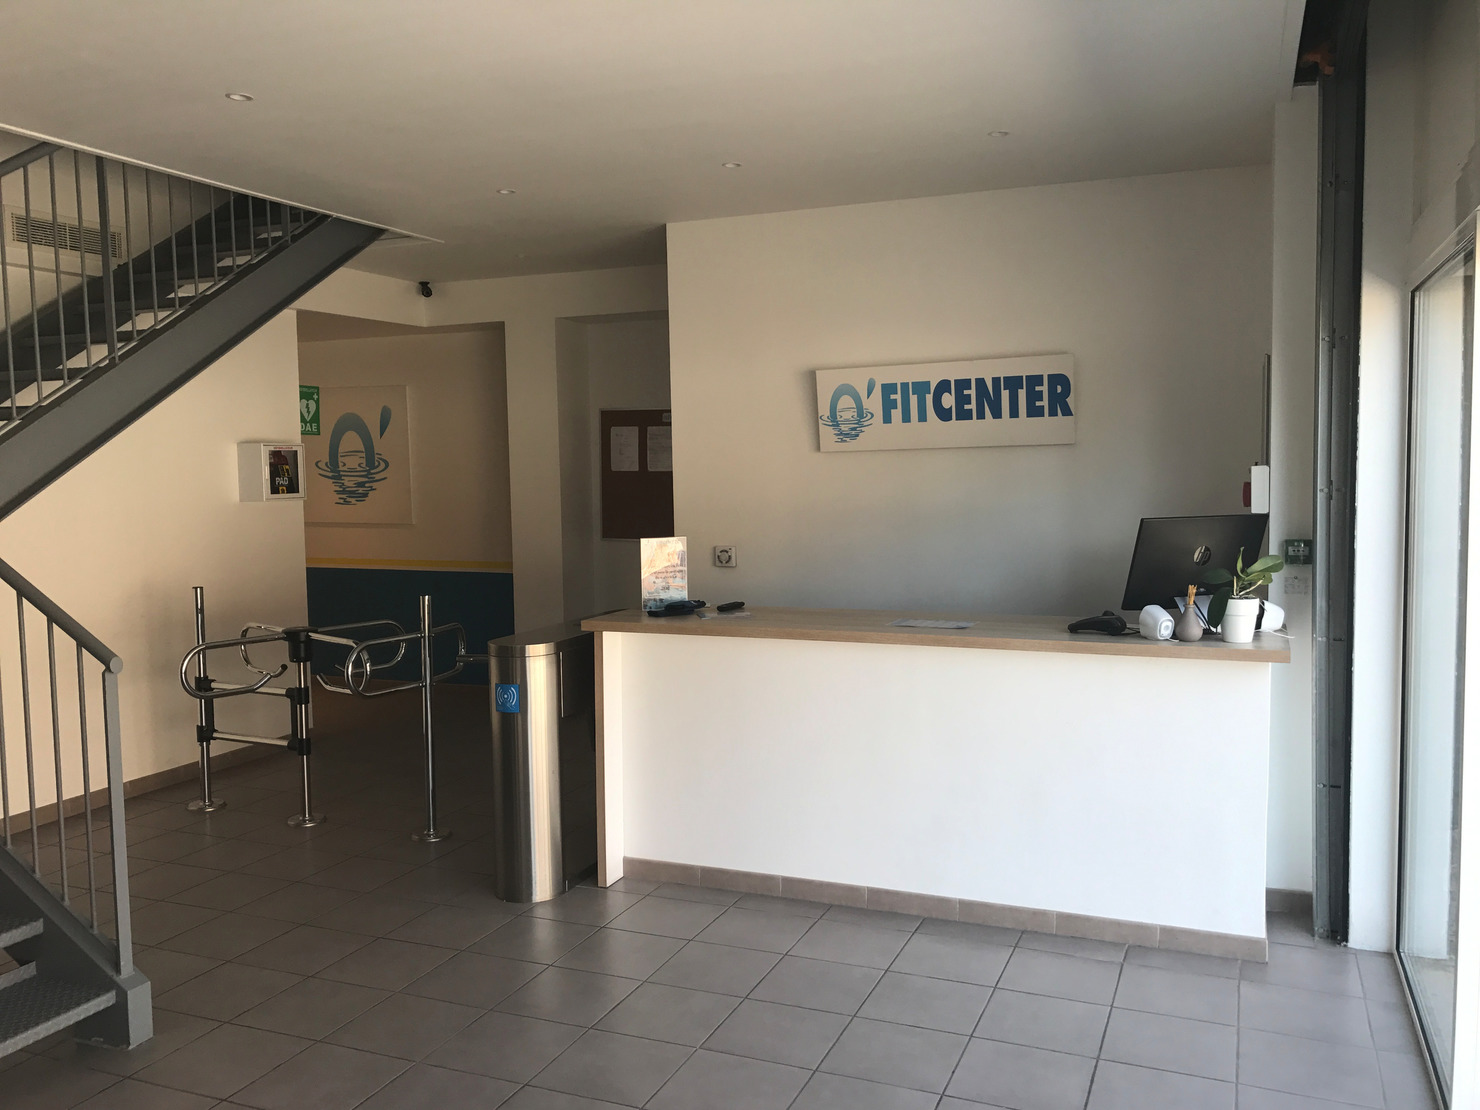 O'FITCENTER